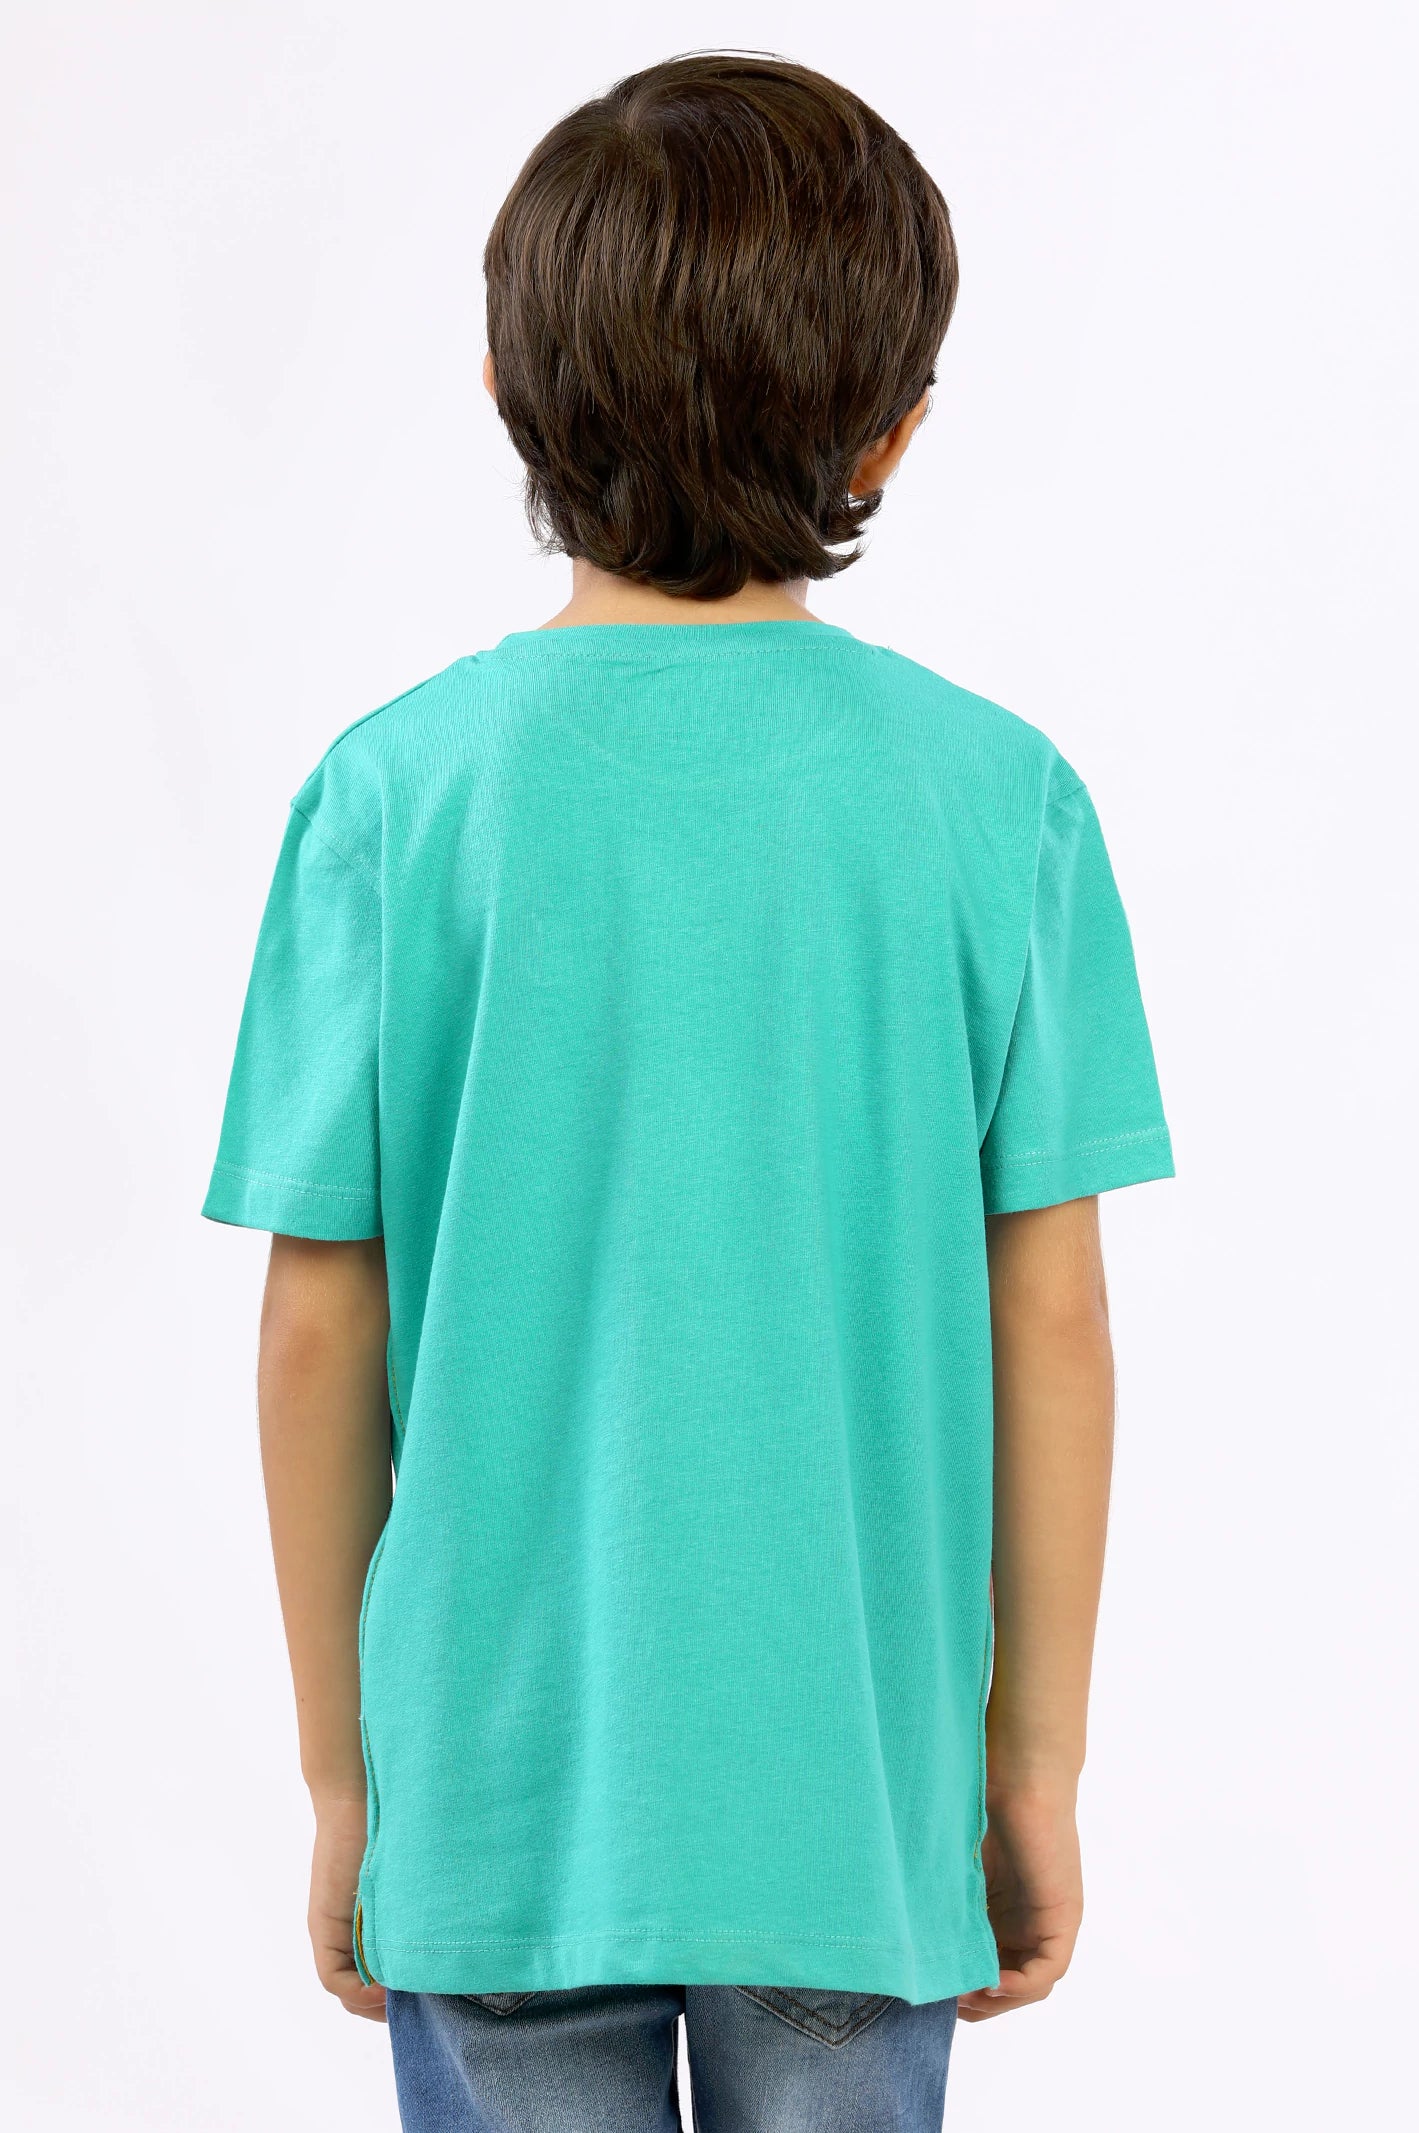 Green Graphic Printed T-Shirt From Diners